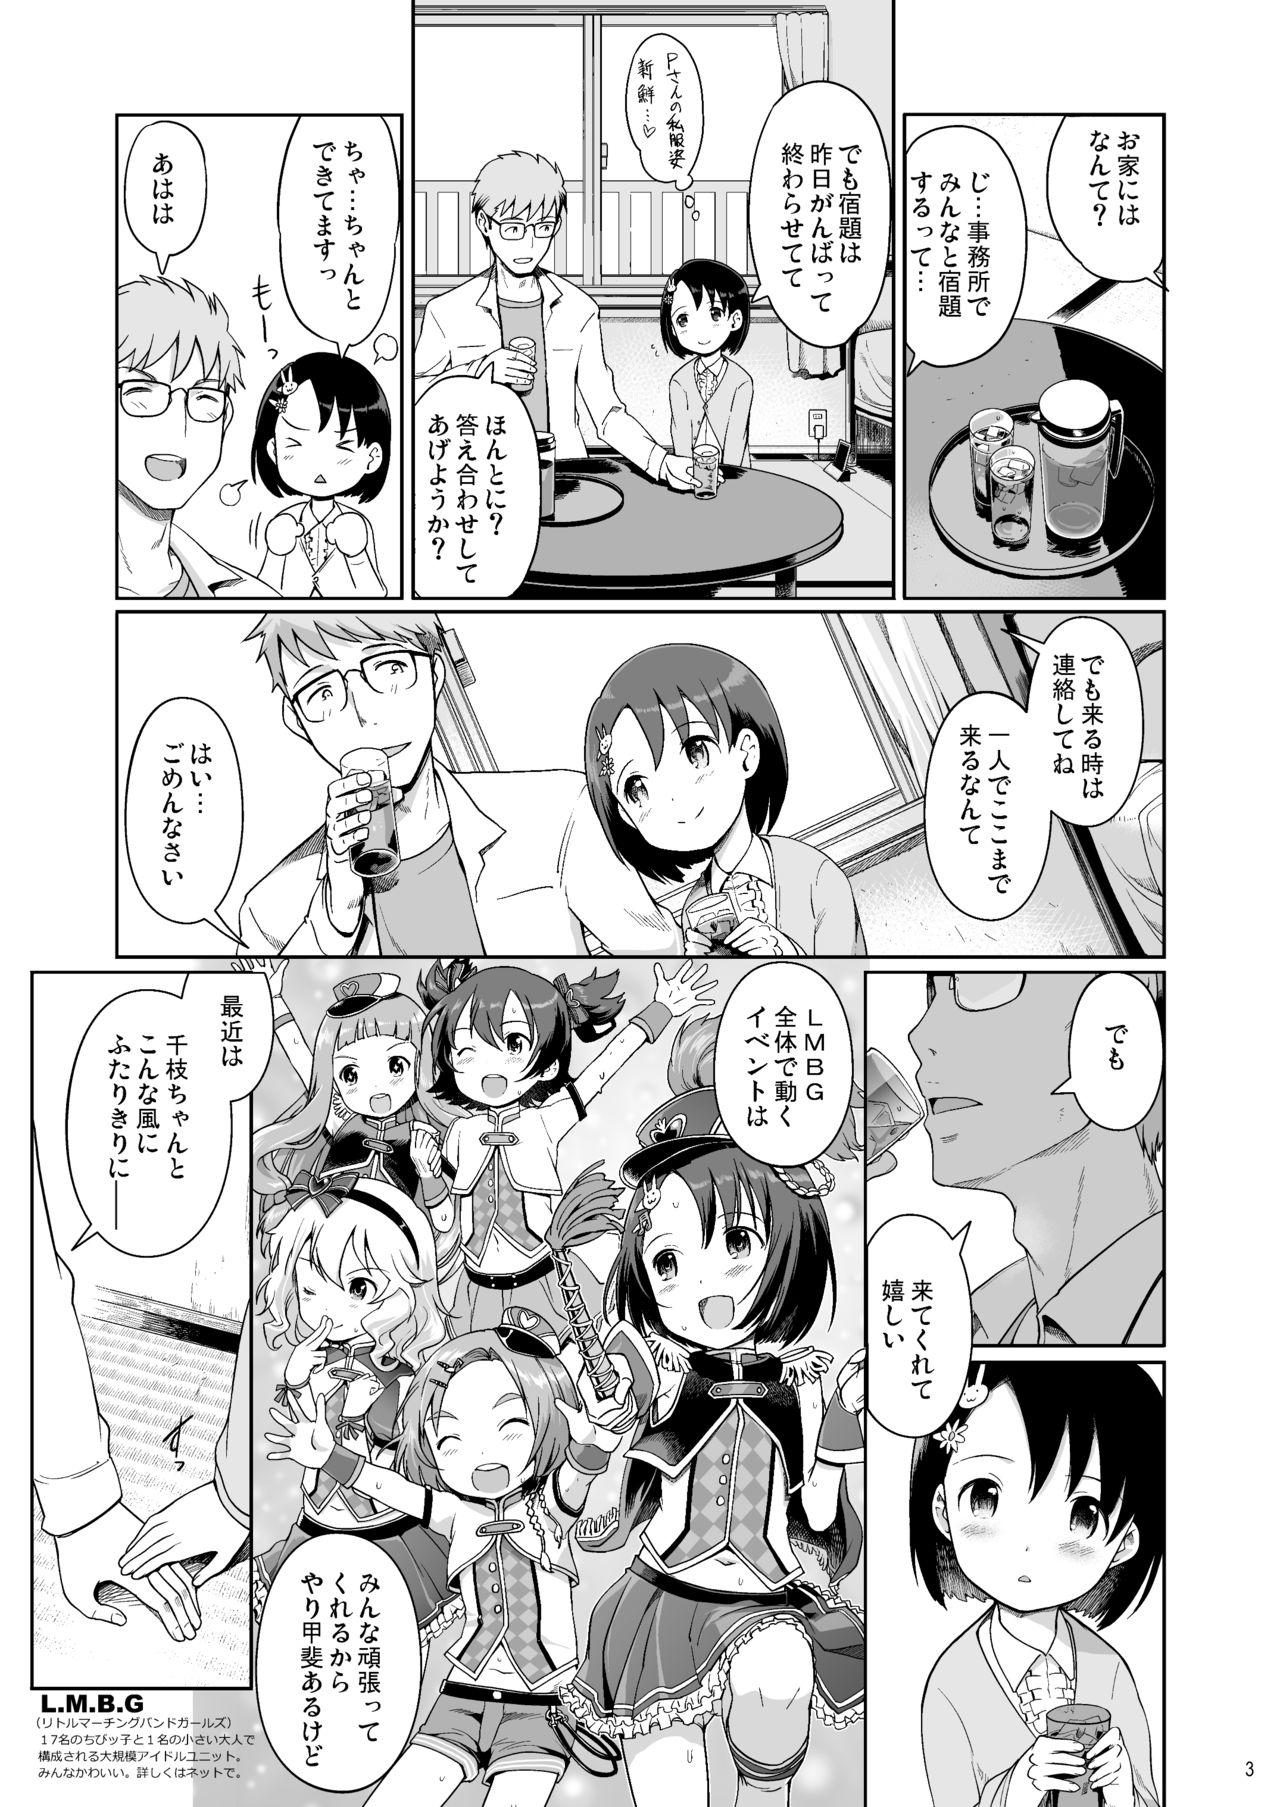 Baile P-san to Issho! 2 - The idolmaster Ffm - Page 4